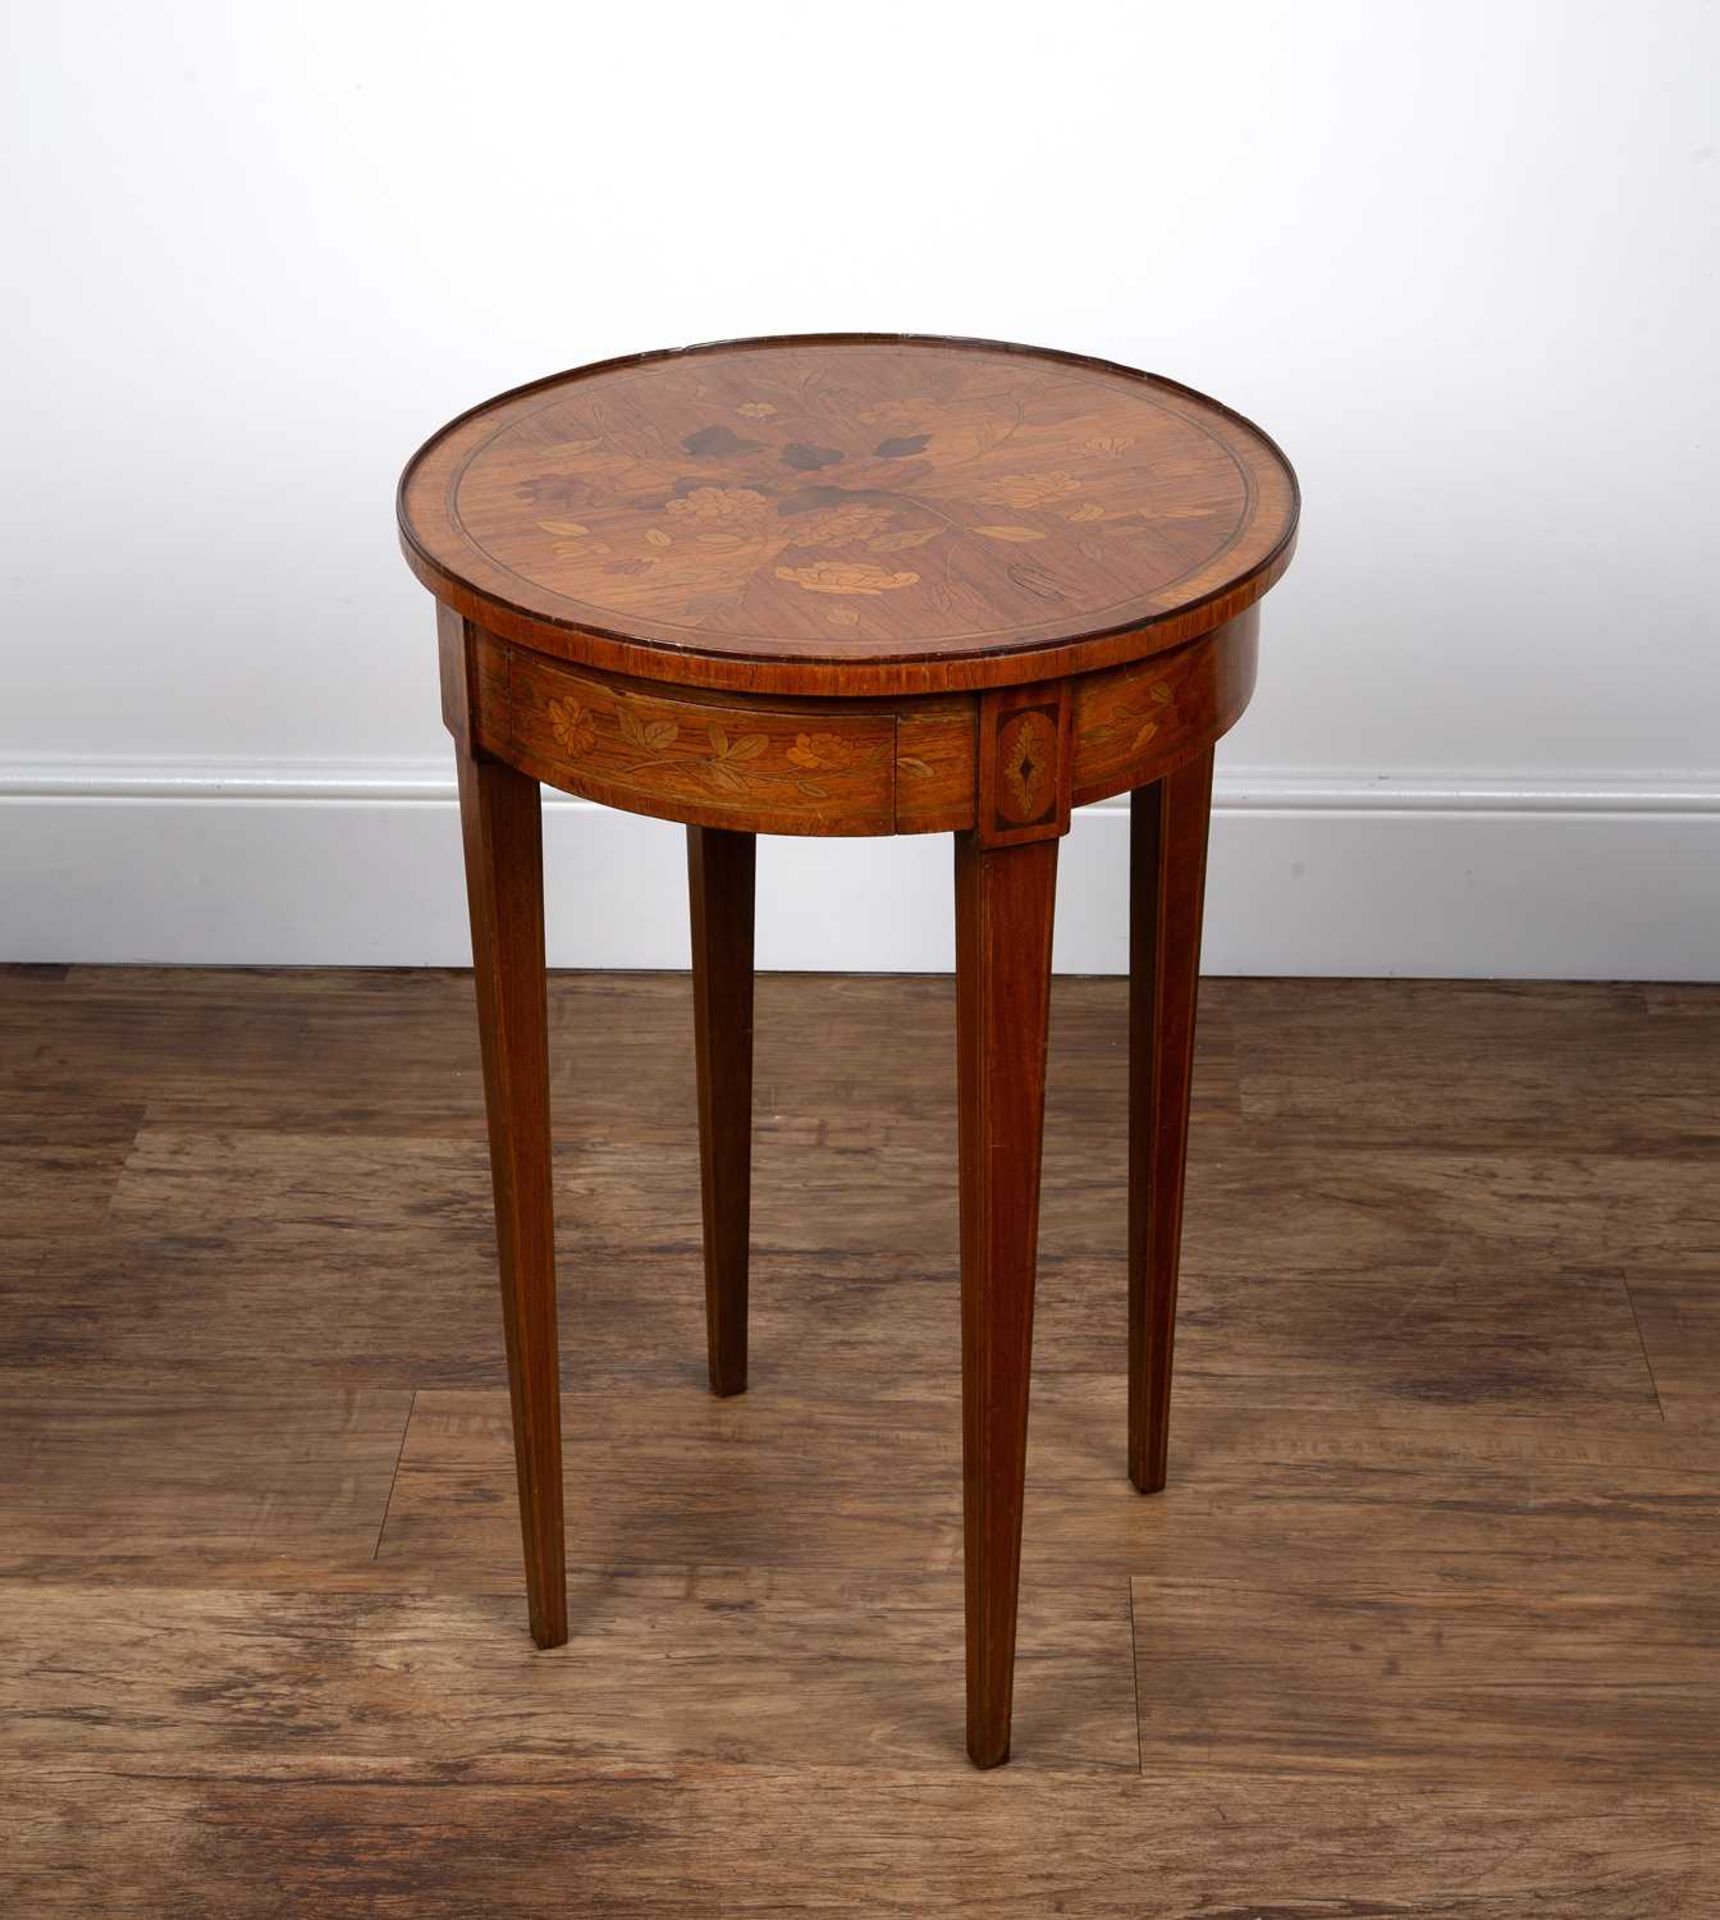 Kingwood circular occasional table French, late 19th/early 20th Century, with floral marquetry - Bild 3 aus 4